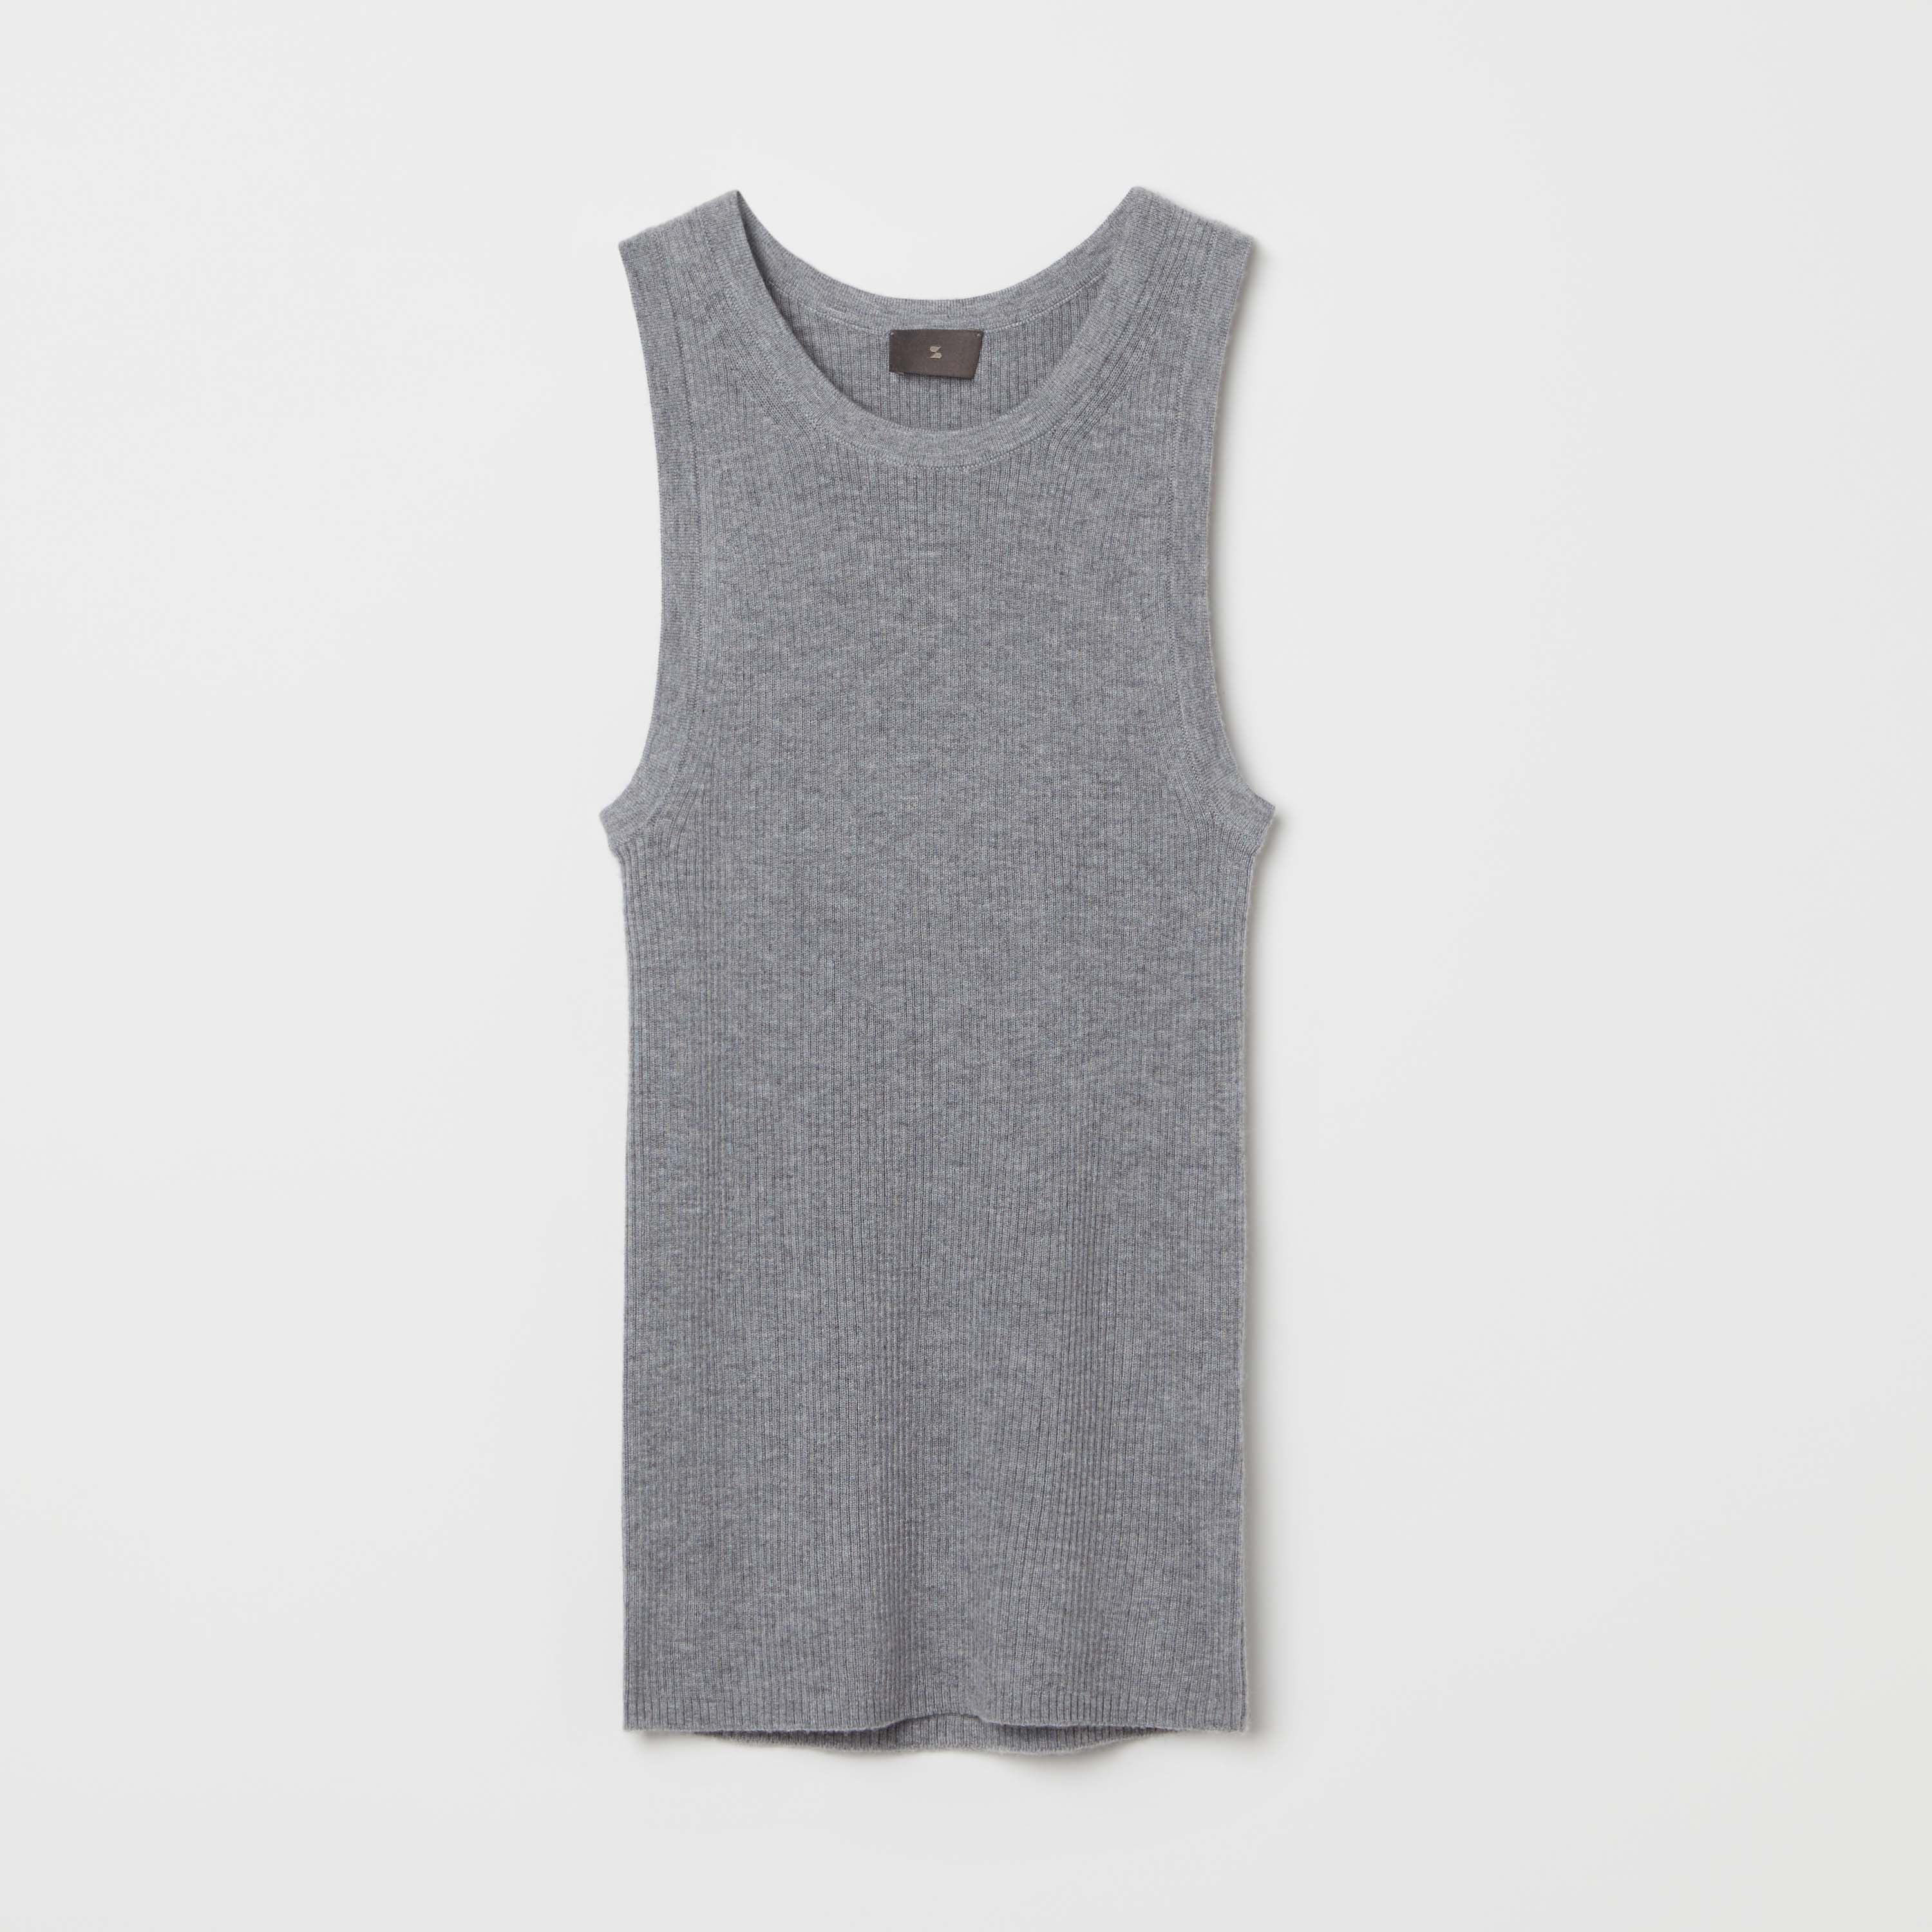 TRIOMPHE TANK TOP IN HERITAGE CASHMERE - LIGHT GREY